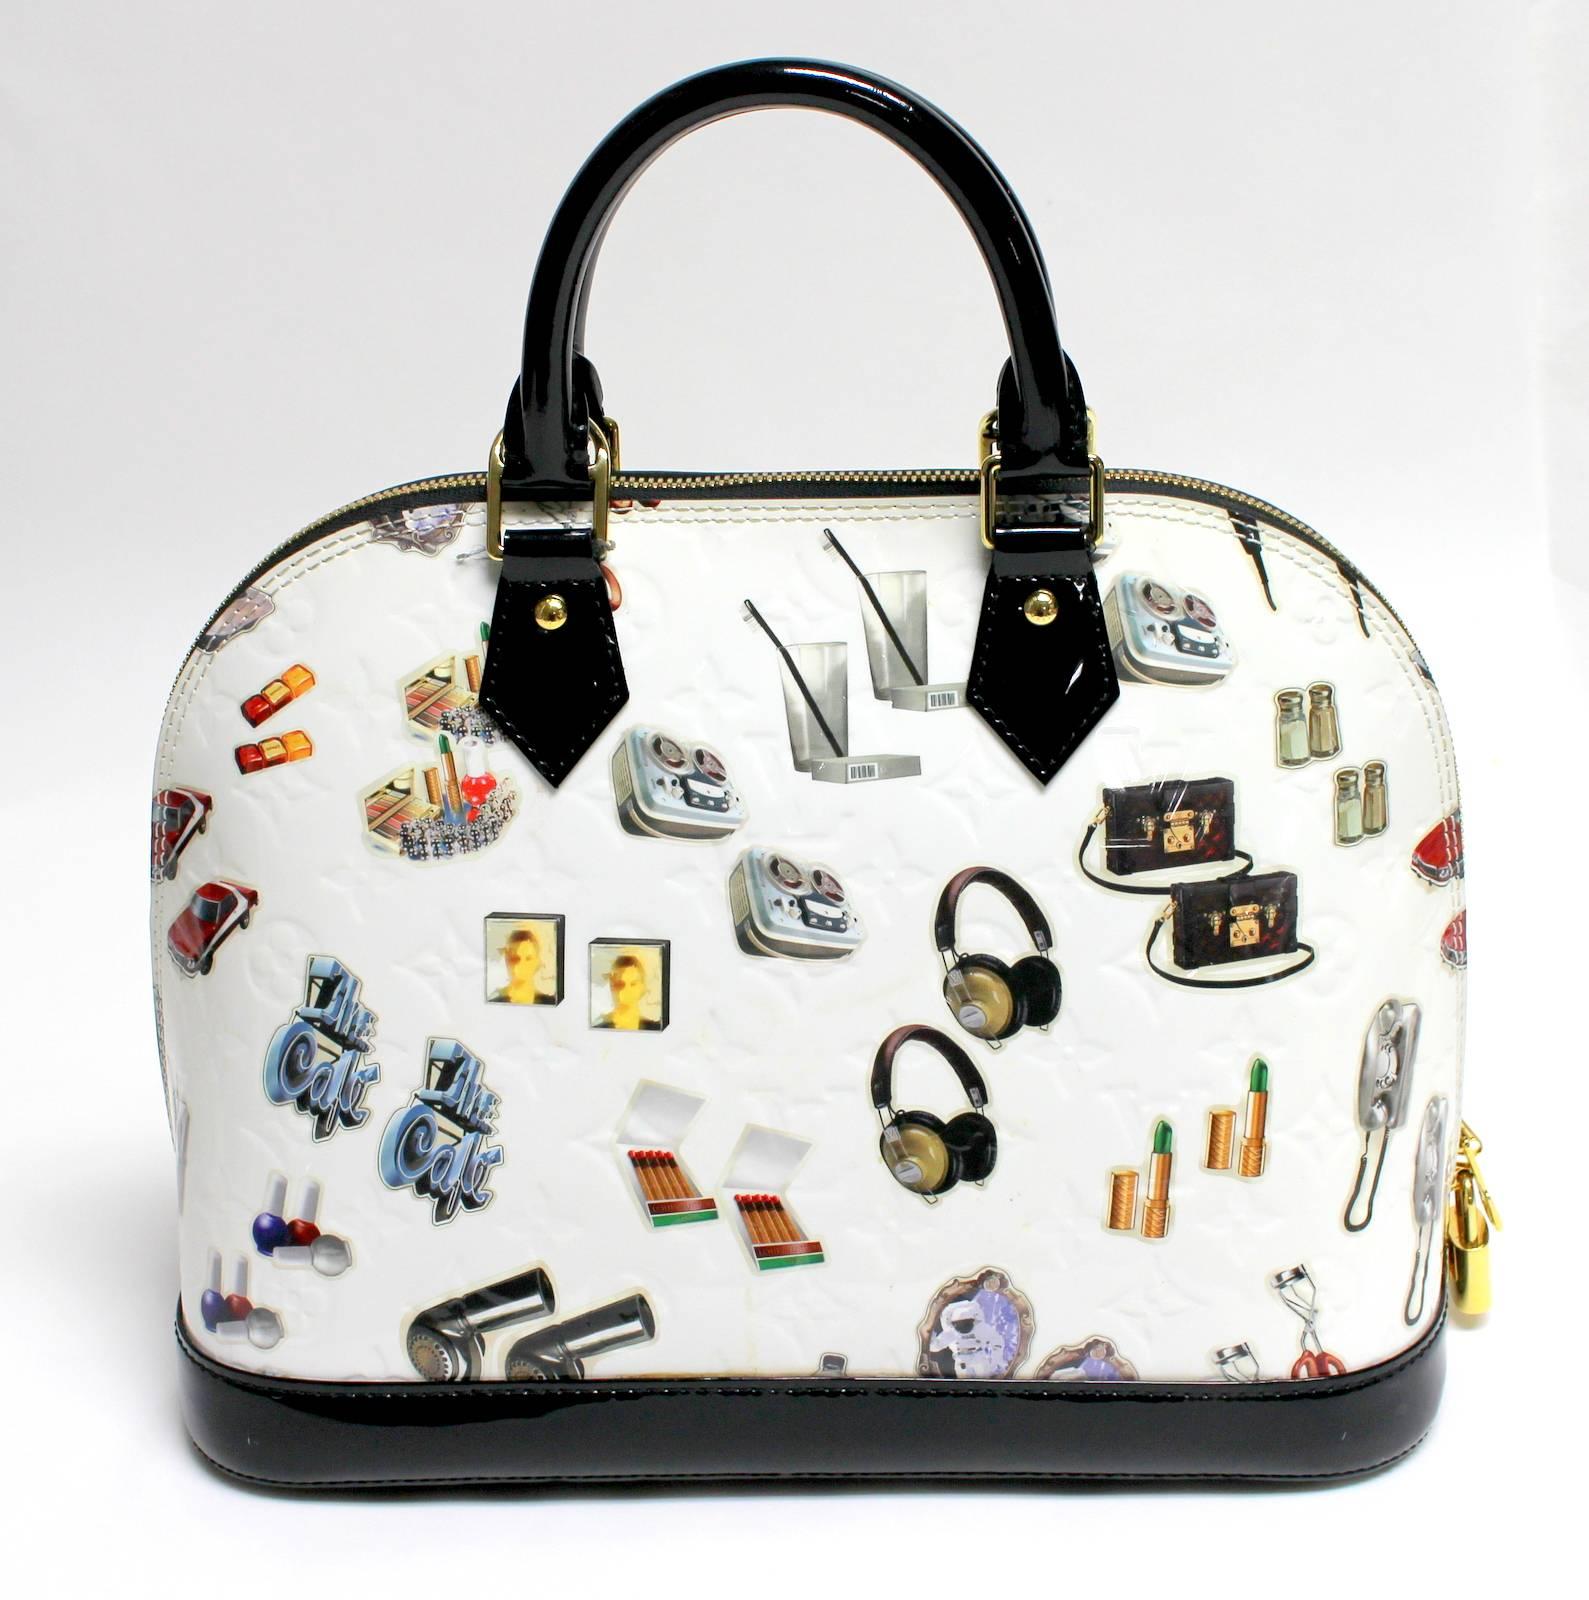 Louis Vuitton White Vernis Stickers Alma PM Satchel
Spring Summer 2015 collection- EXCELLENT PLUS; rarely carried.  
Feminine domed top Alma in white with colorful animation “sticker” pairs on front and rear.  Black patent leather sturdy footed